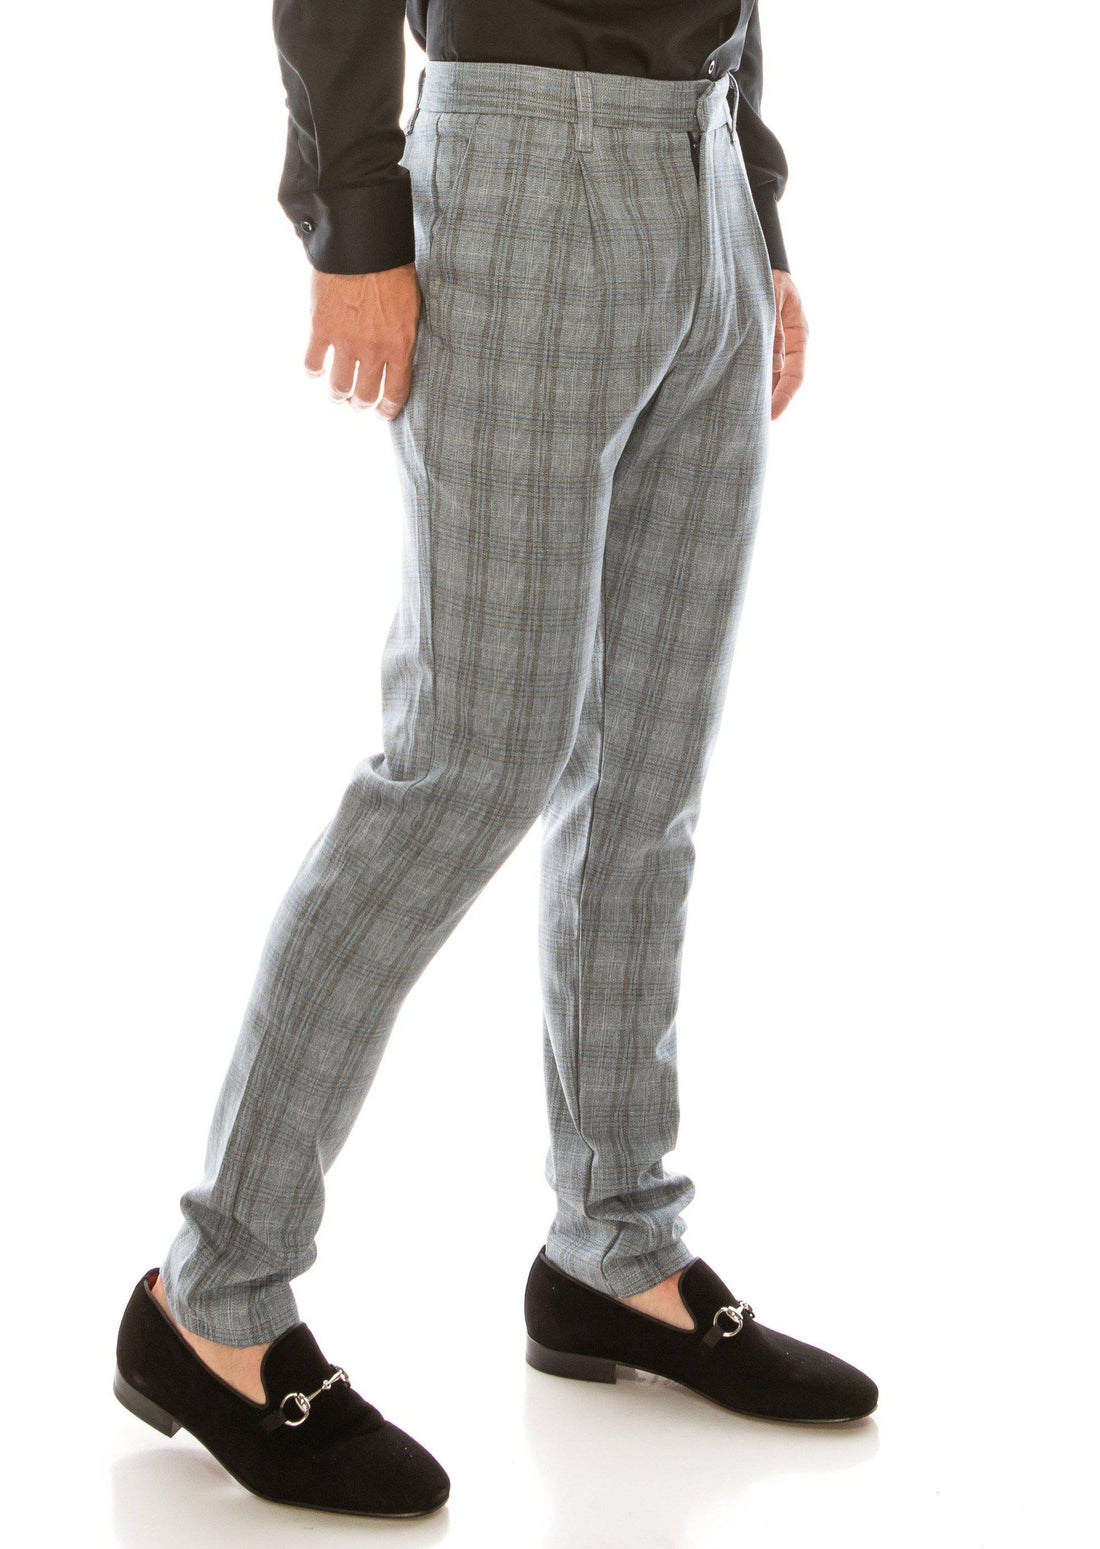 Patterned Slim Fit Casual Trouser- DARK GREY - Ron Tomson